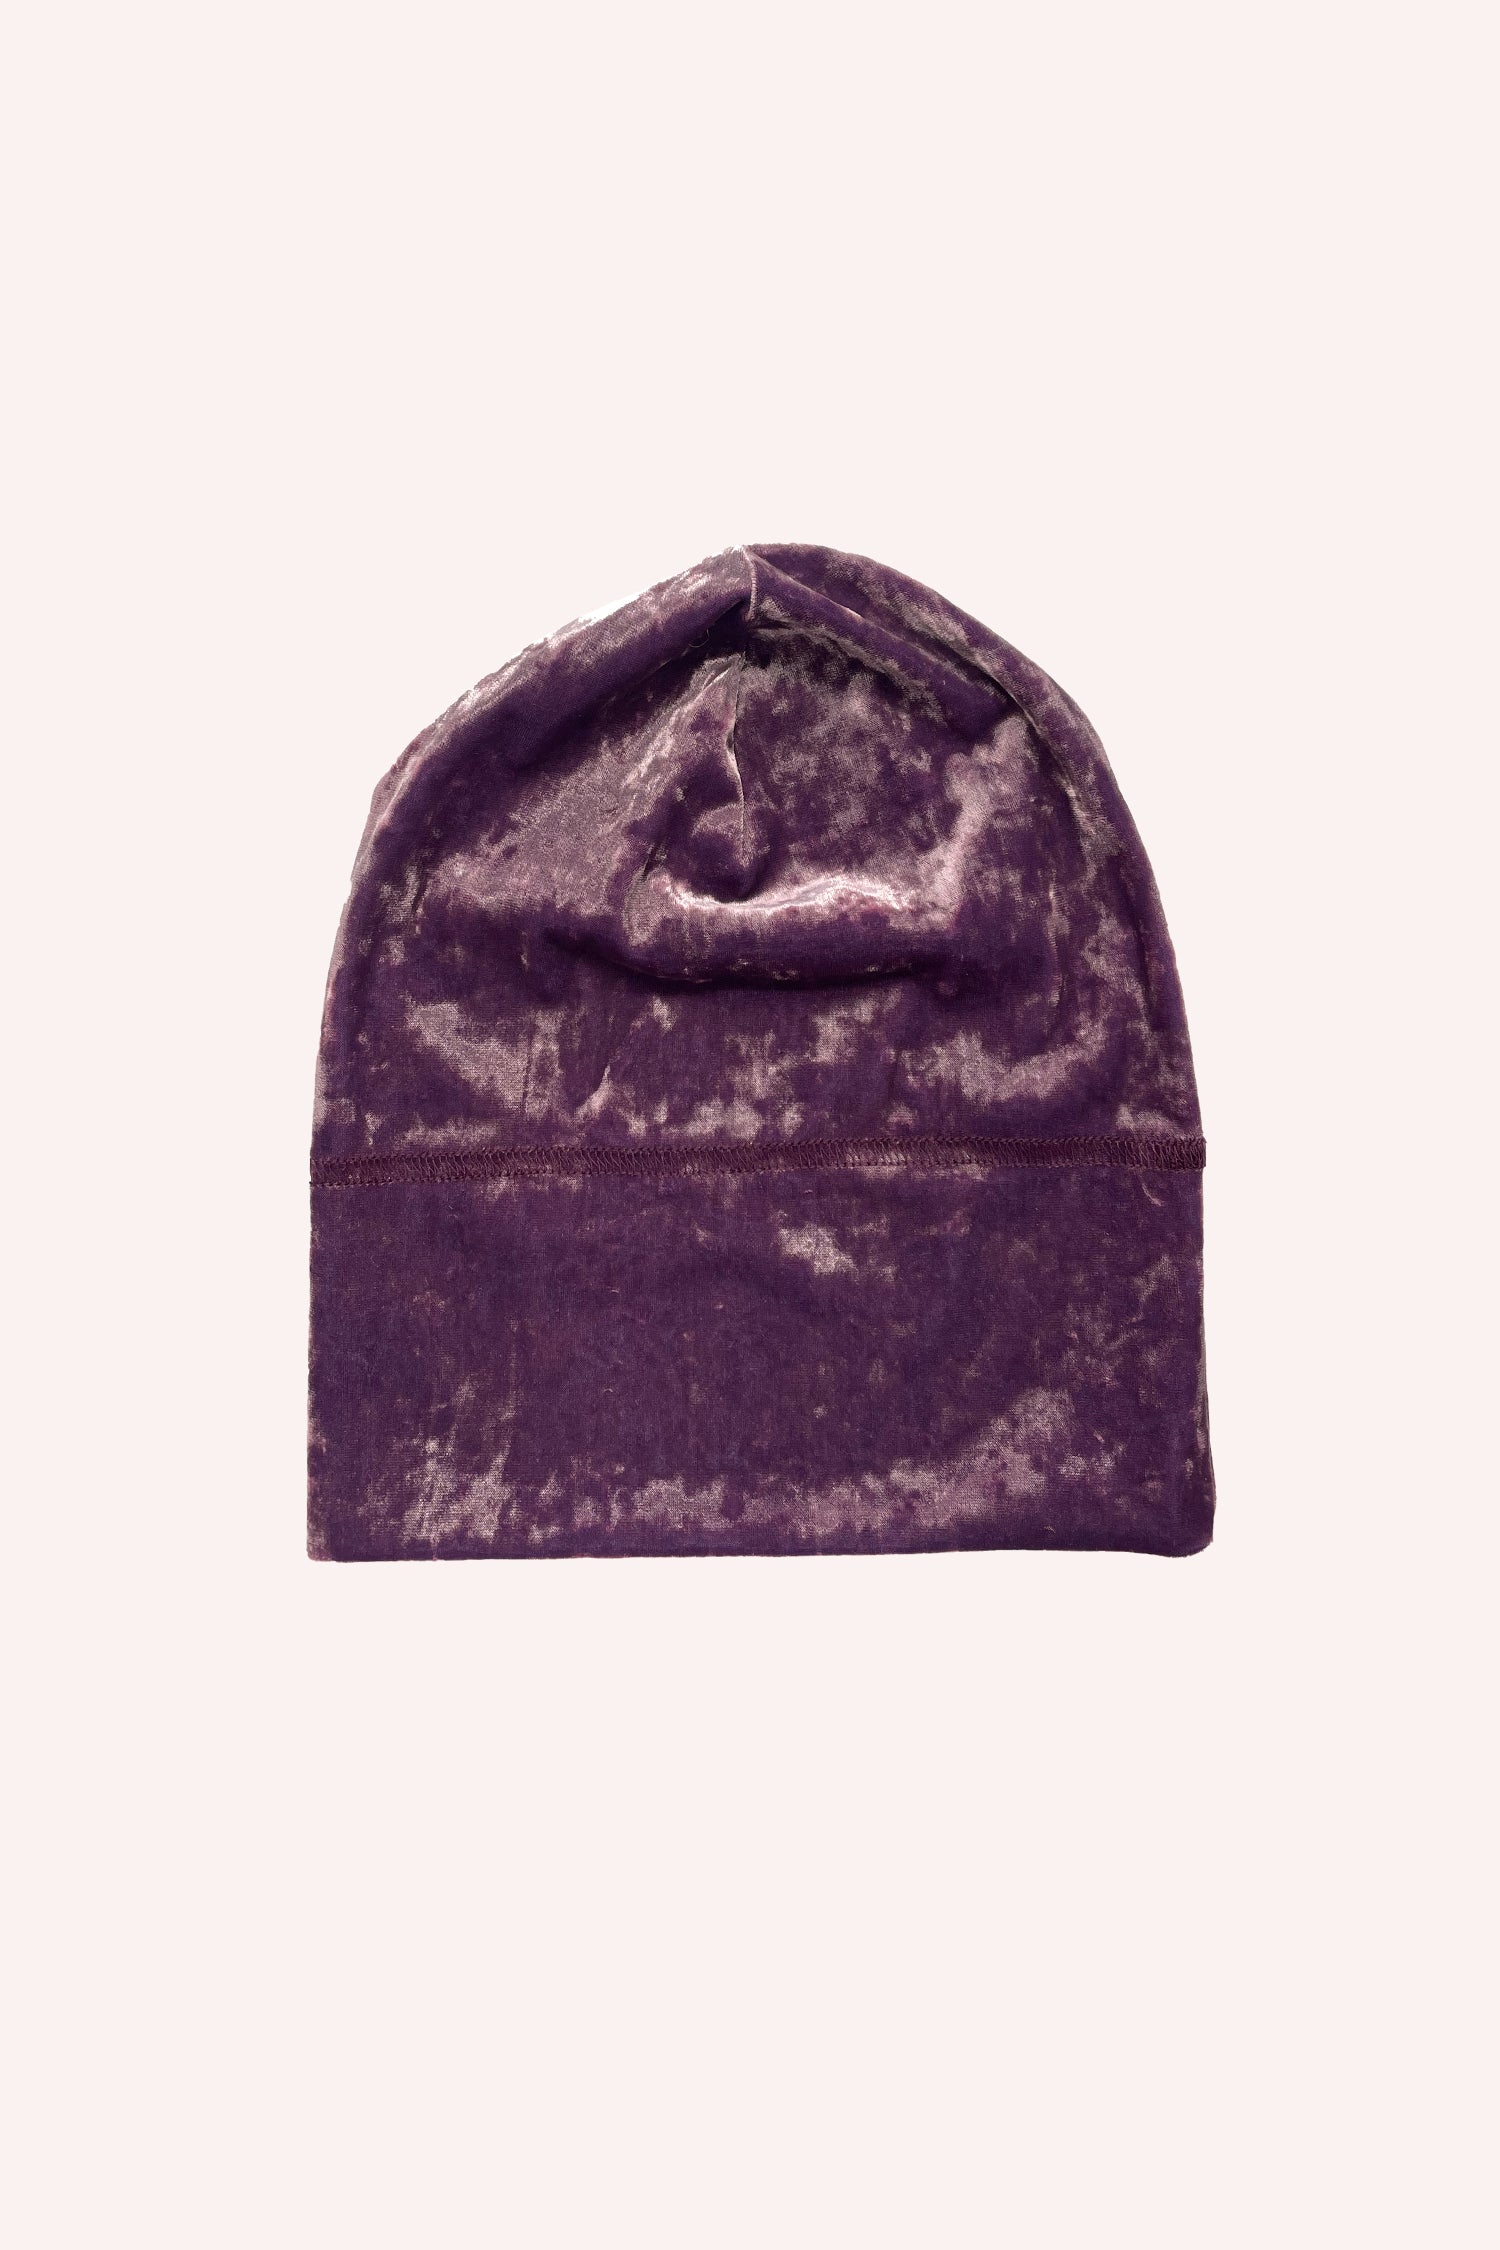 Stretch Velvet Beanie Lavender, there are large lavender stitches that run around it